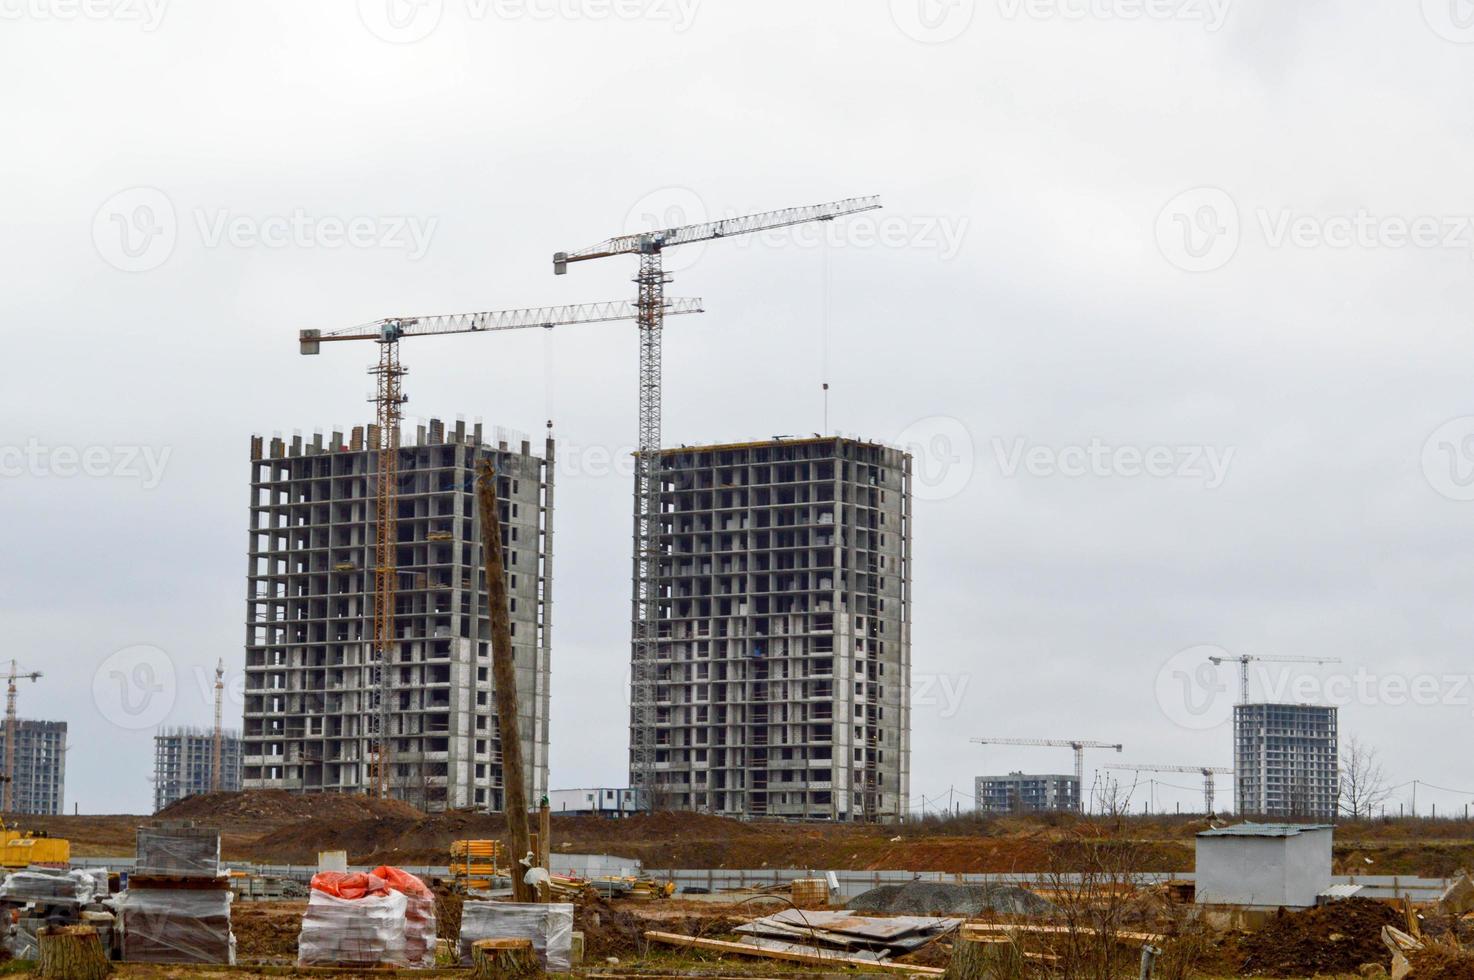 Construction of a new microdistrict with high houses, new buildings with developed infrastructure with the help of large industrial cranes and professional construction equipment in a big city photo